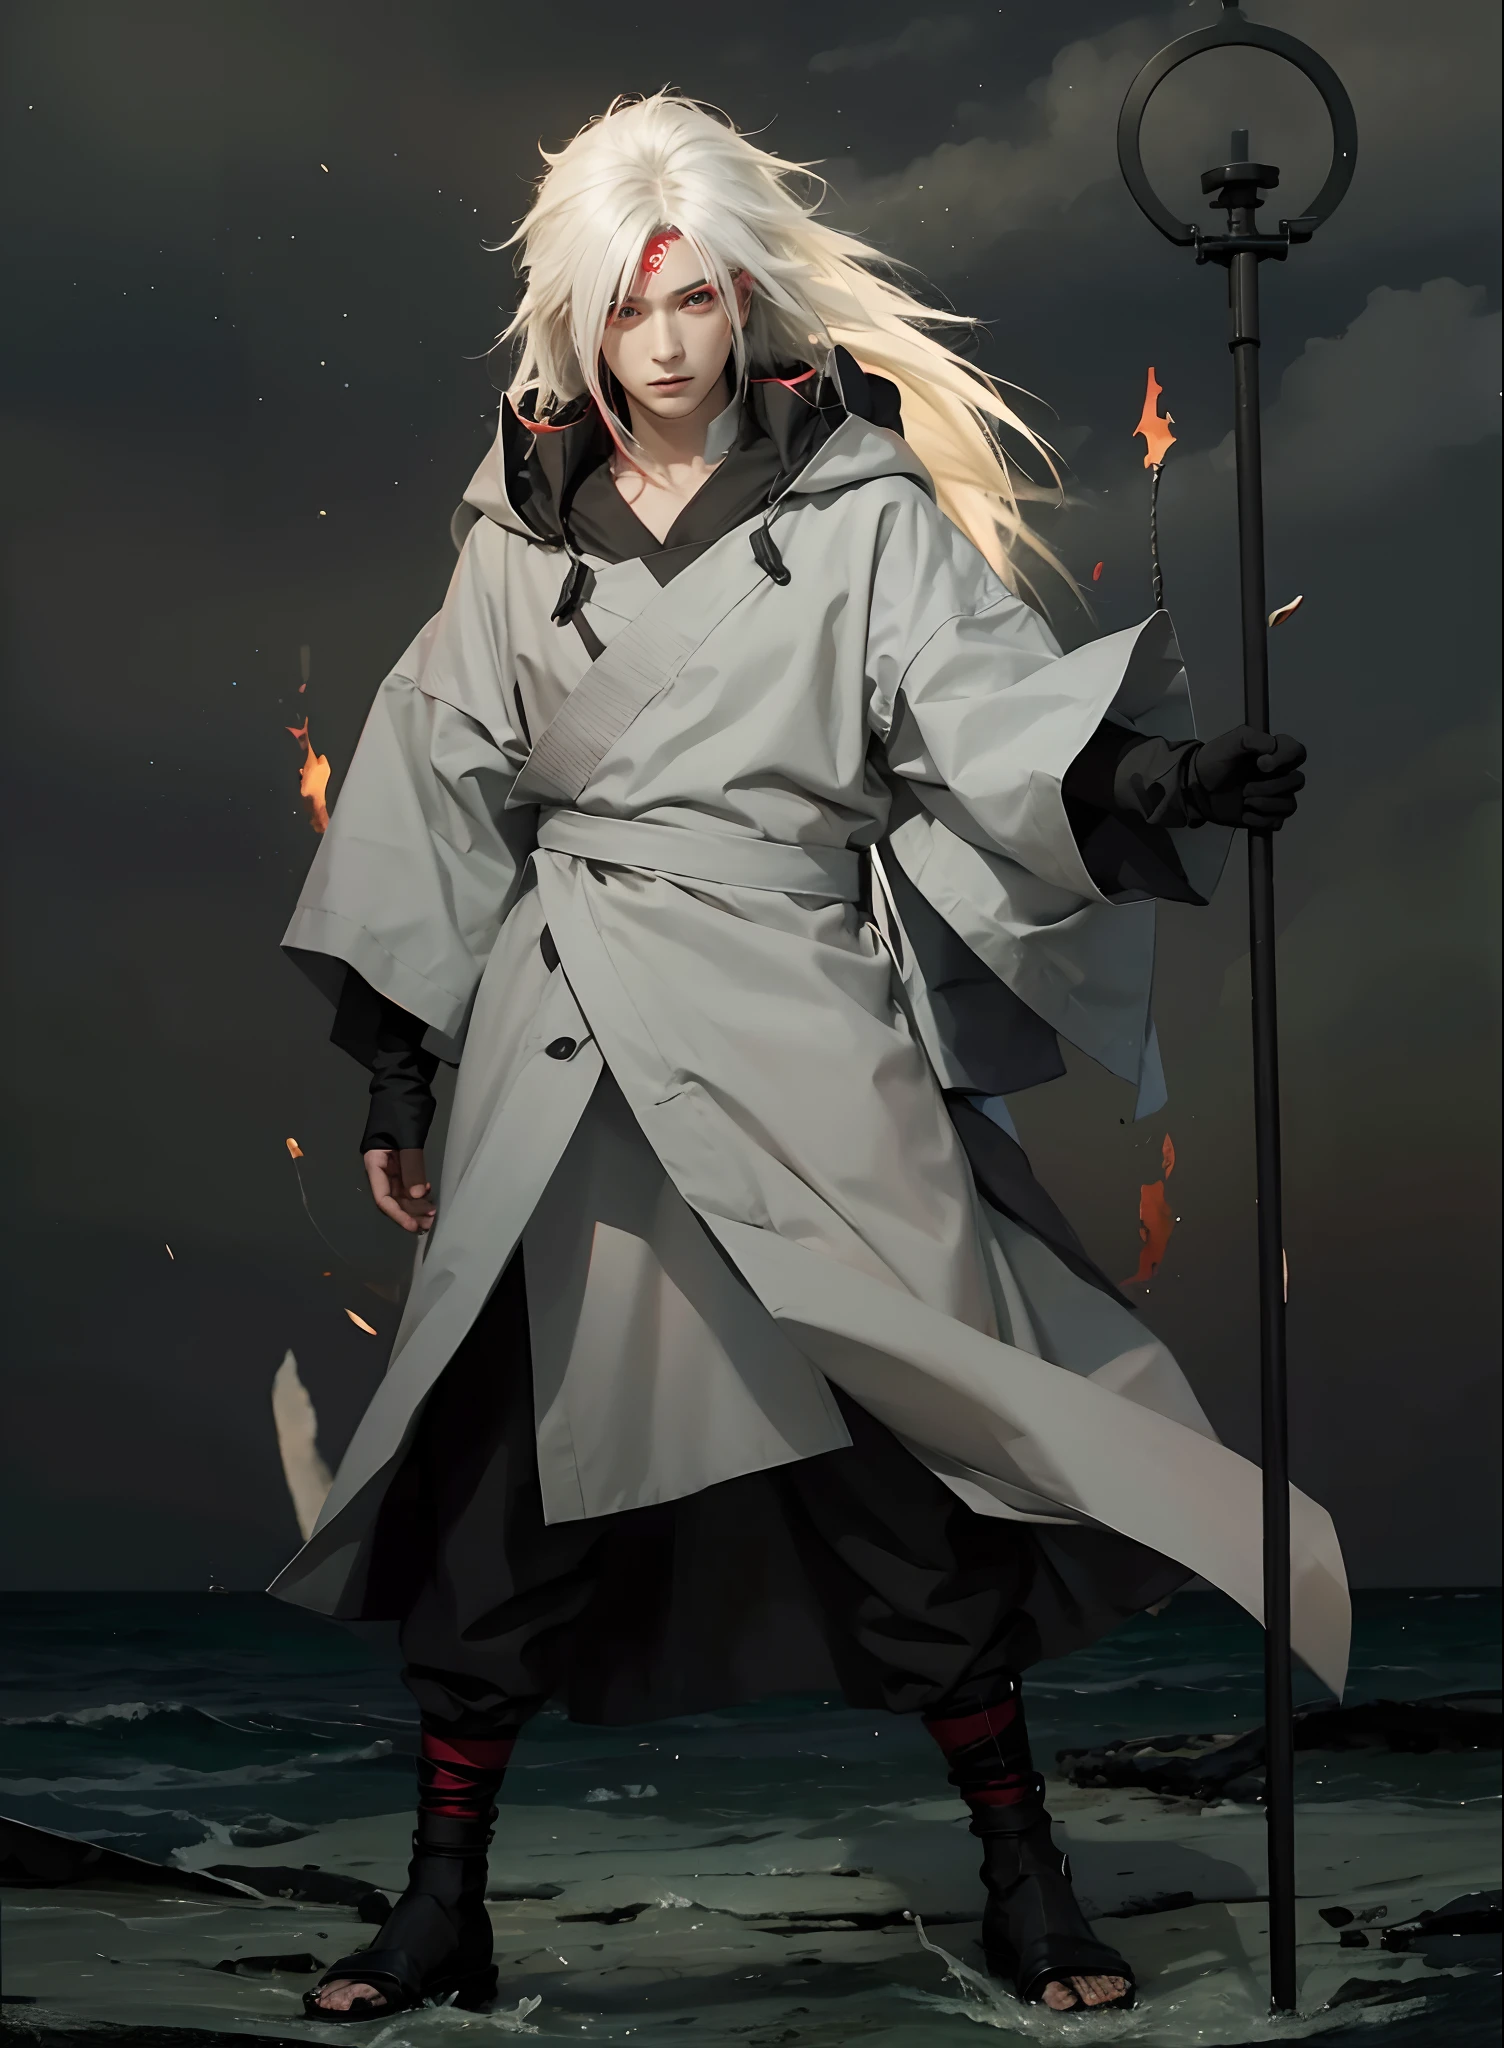 1male, uchiha madara in anime naruto, long hair , black hair, red eyes, handsome, red clothes, realistic clothes, detail clothes, beach city background, ultra detail, realistic